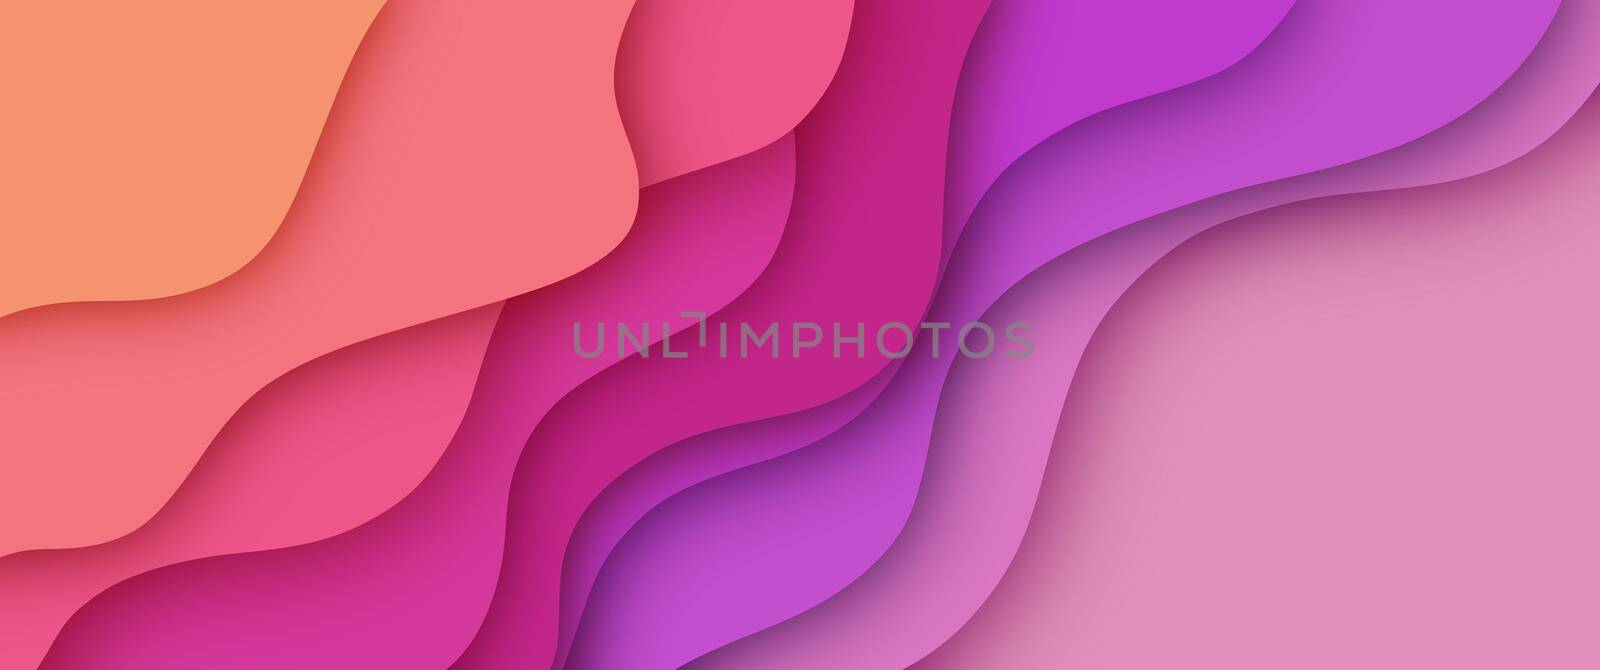 Abstract paper cut nature background. Simple minimalistic layered design with candy colors paper cuts. by iliris